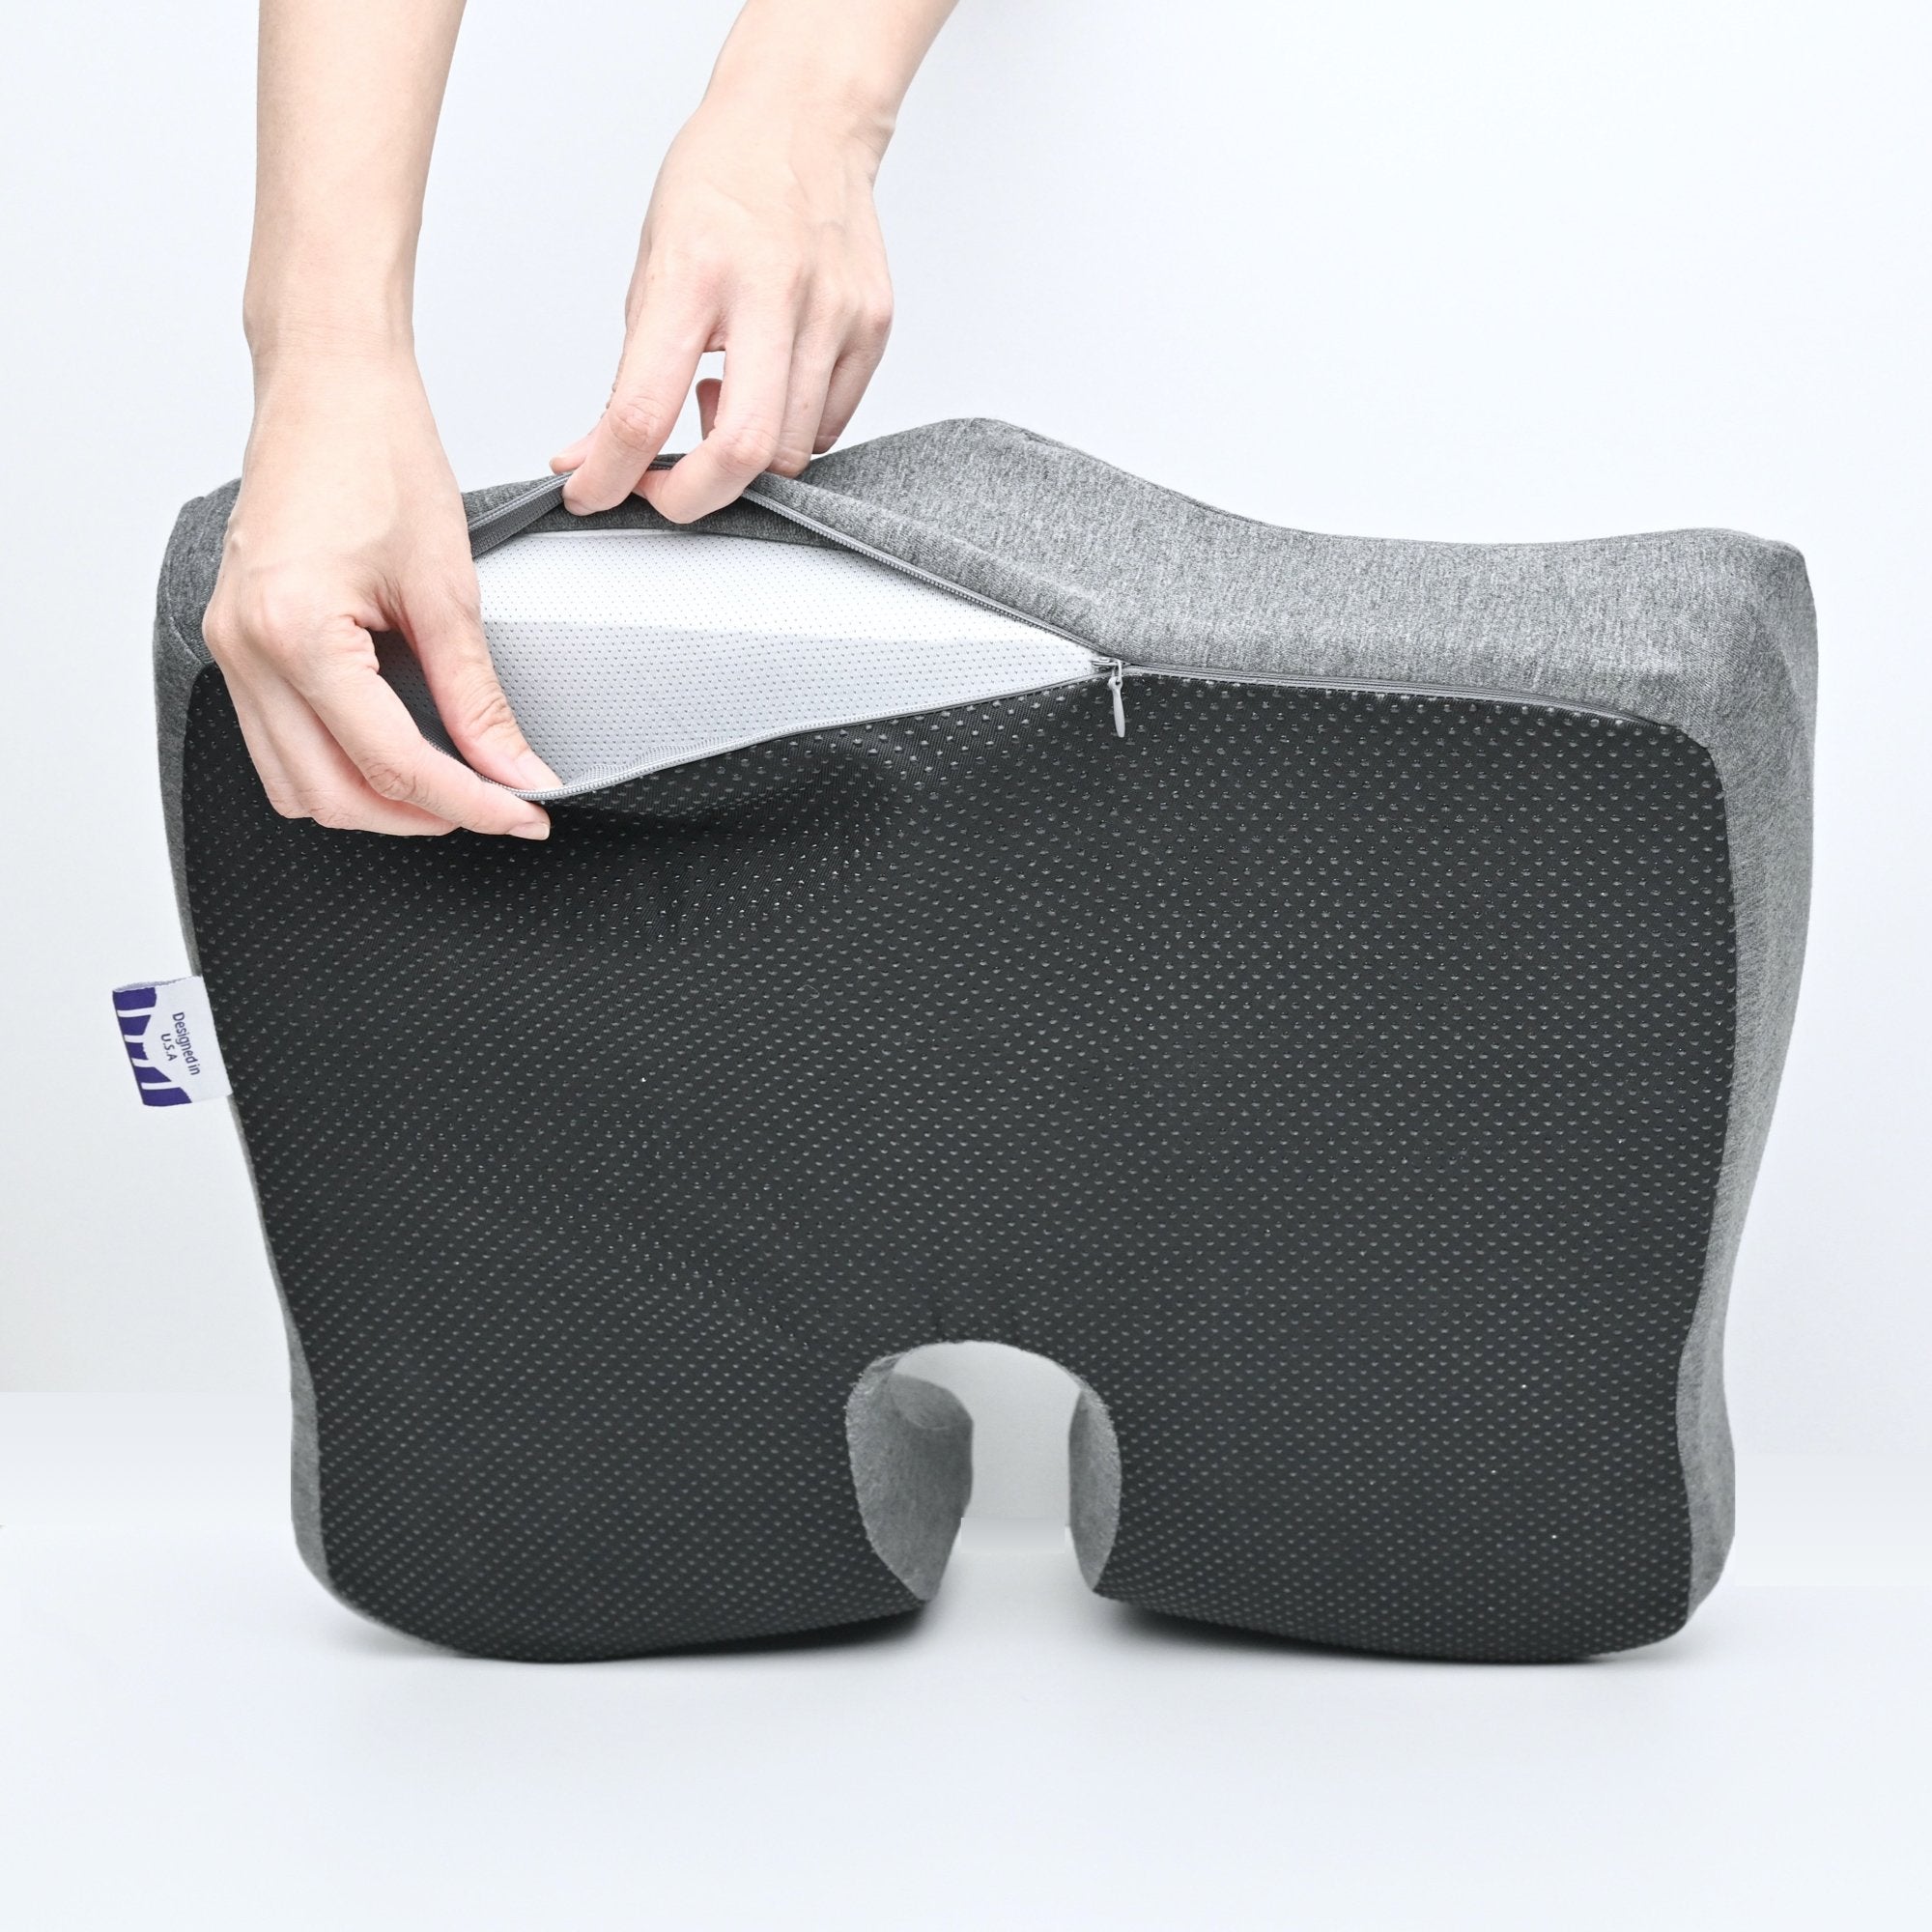 Cushion Lab Patented Pressure Relief Seat Cushion for Long Sitting Hours on  Office/Home Chair, Car, Wheelchair - Extra-Dense Memory Foam for Hip